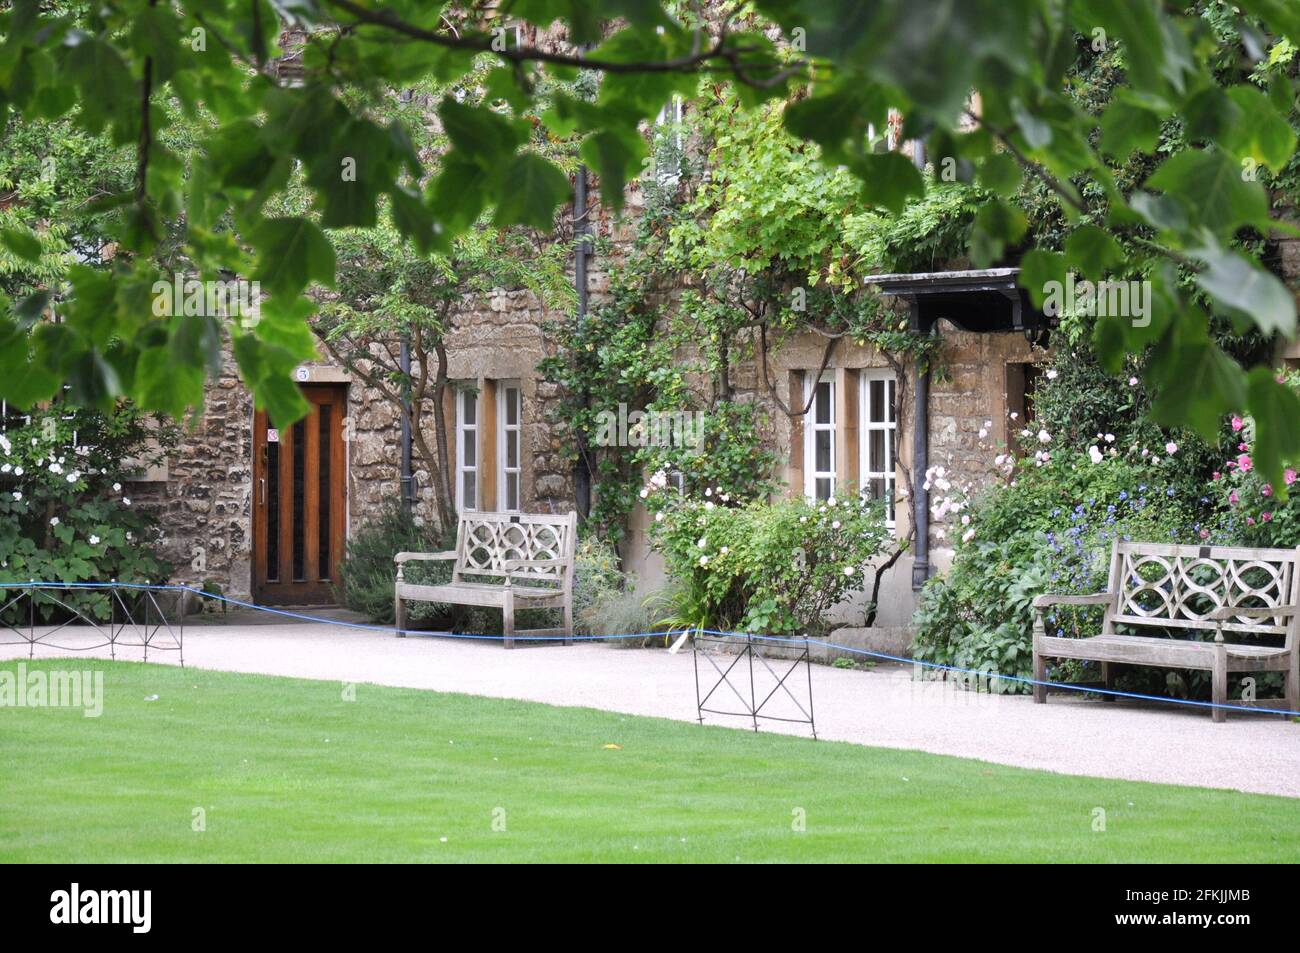 View of lawn and building facade with decorative planting from Hertford College Old Quad, Oxford, United Kingdom. Overcast Sky. Stock Photo